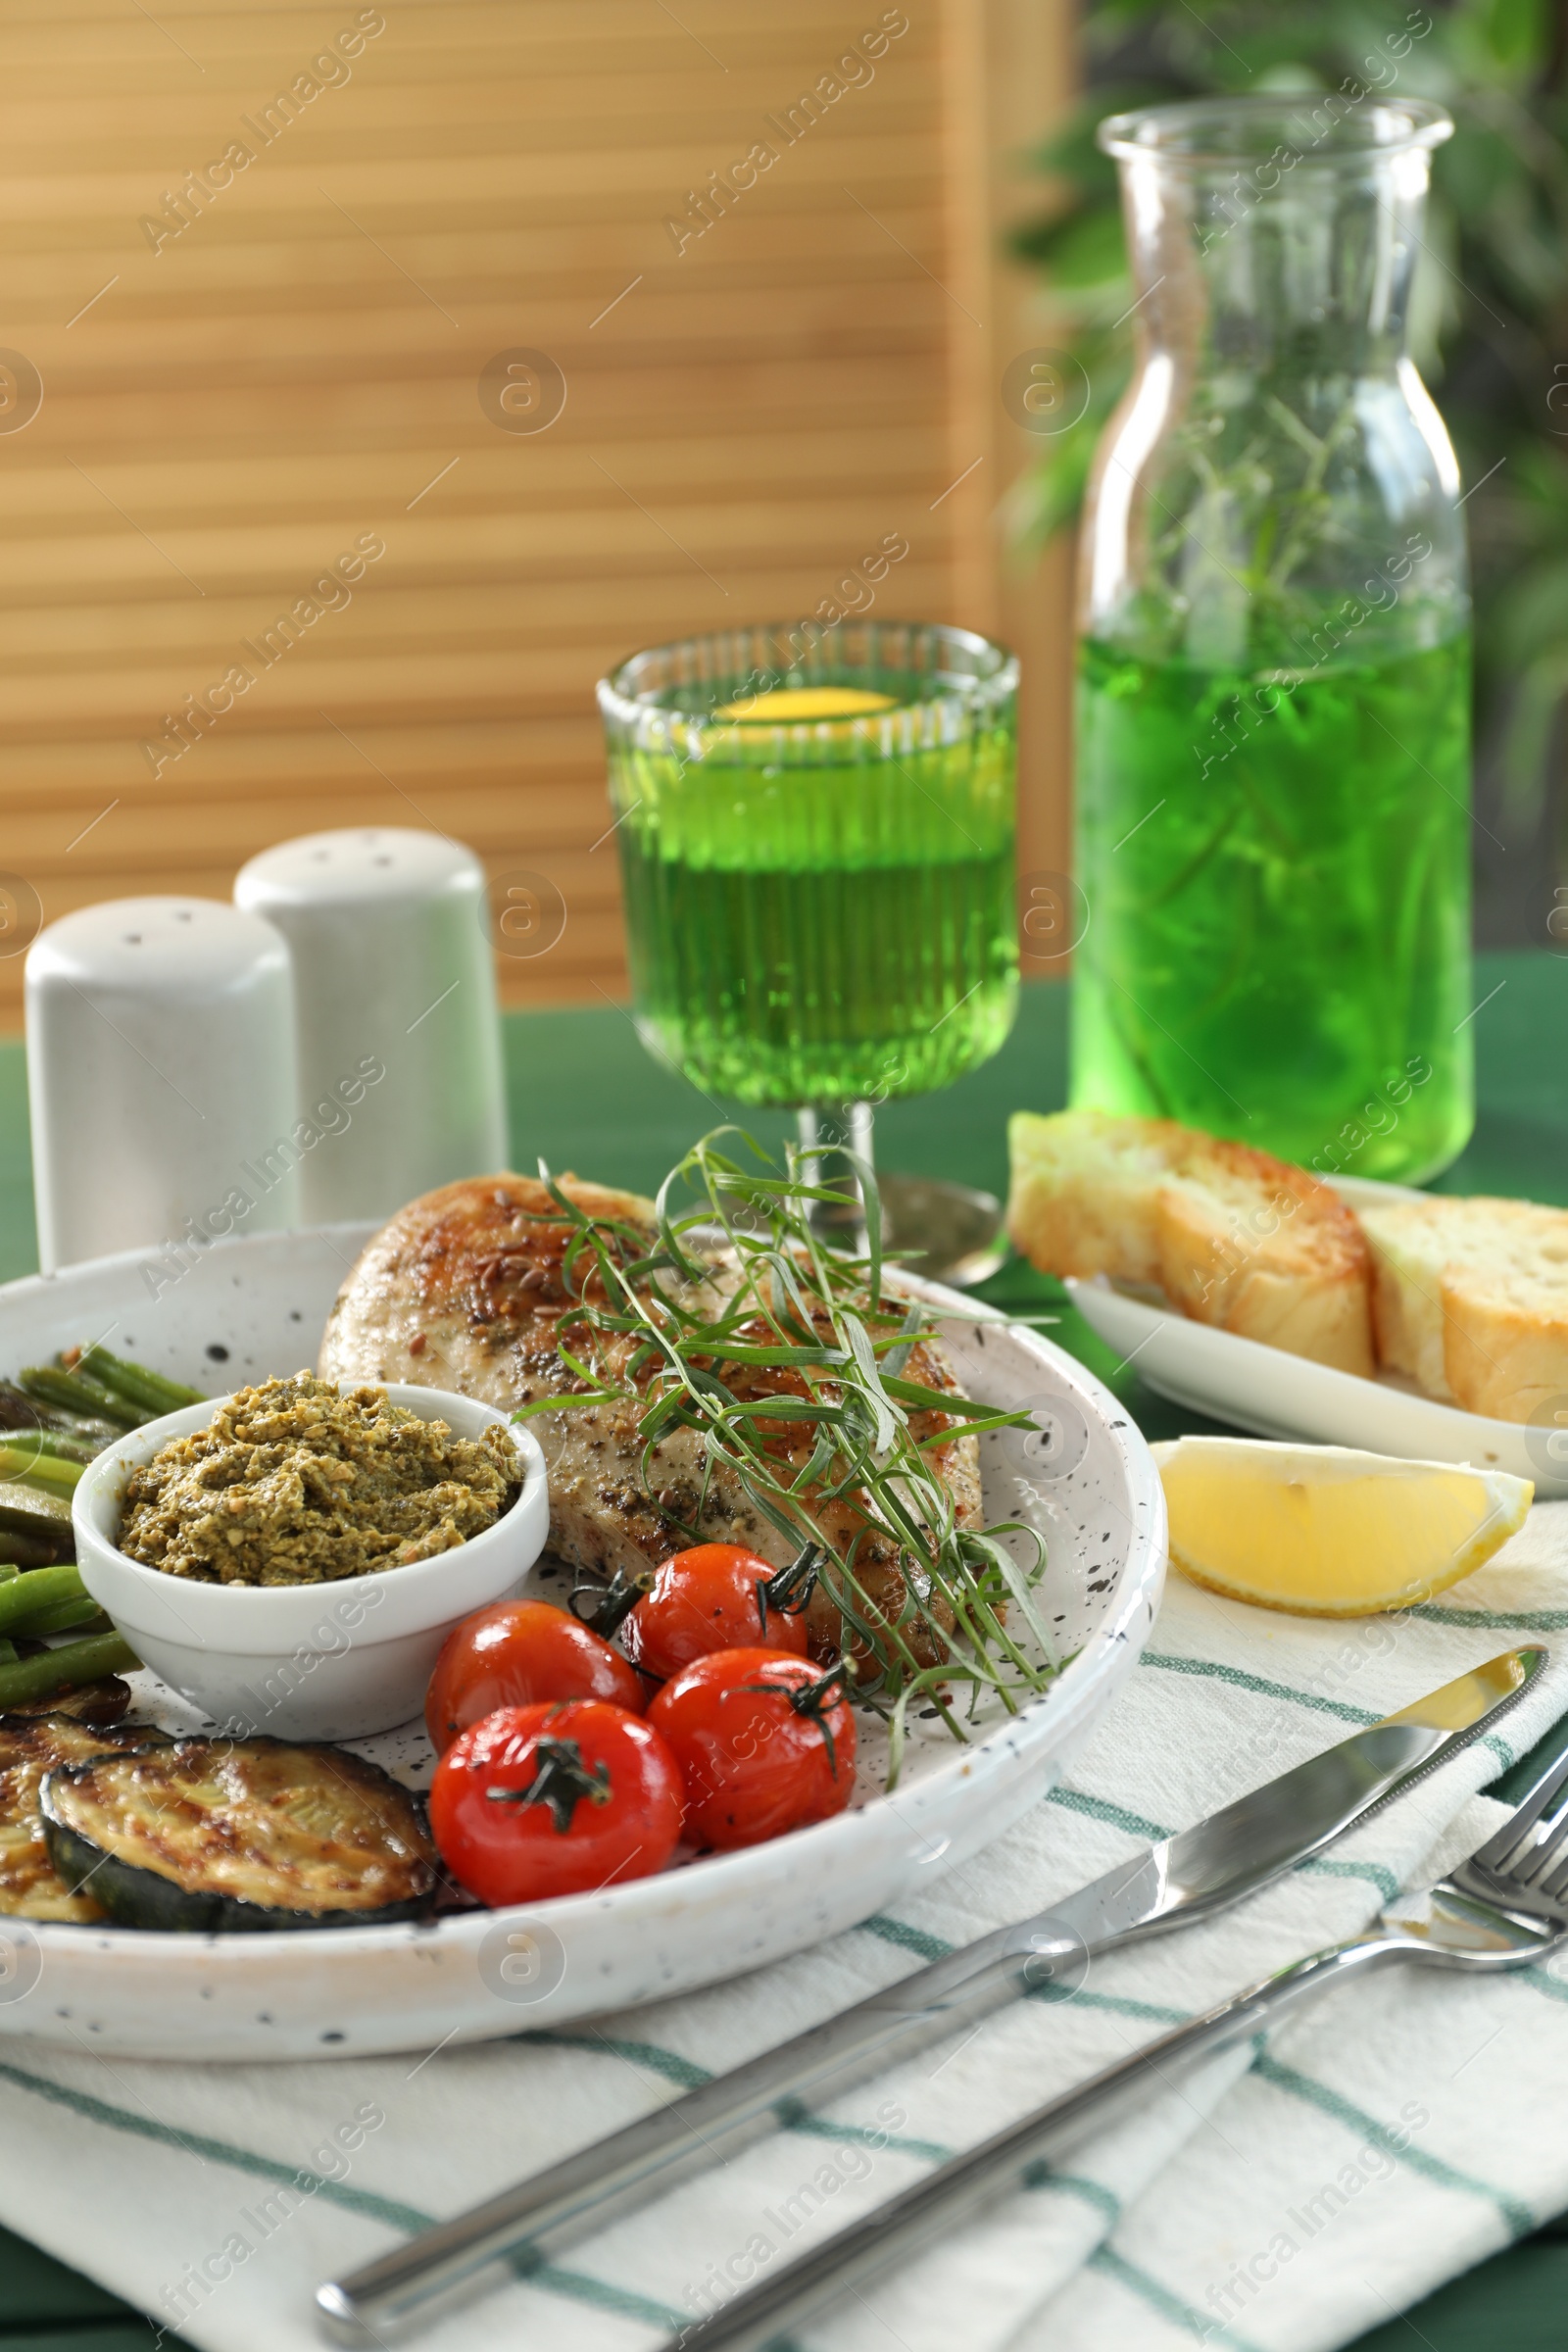 Photo of Tasty chicken, vegetables with tarragon and pesto sauce served on green table